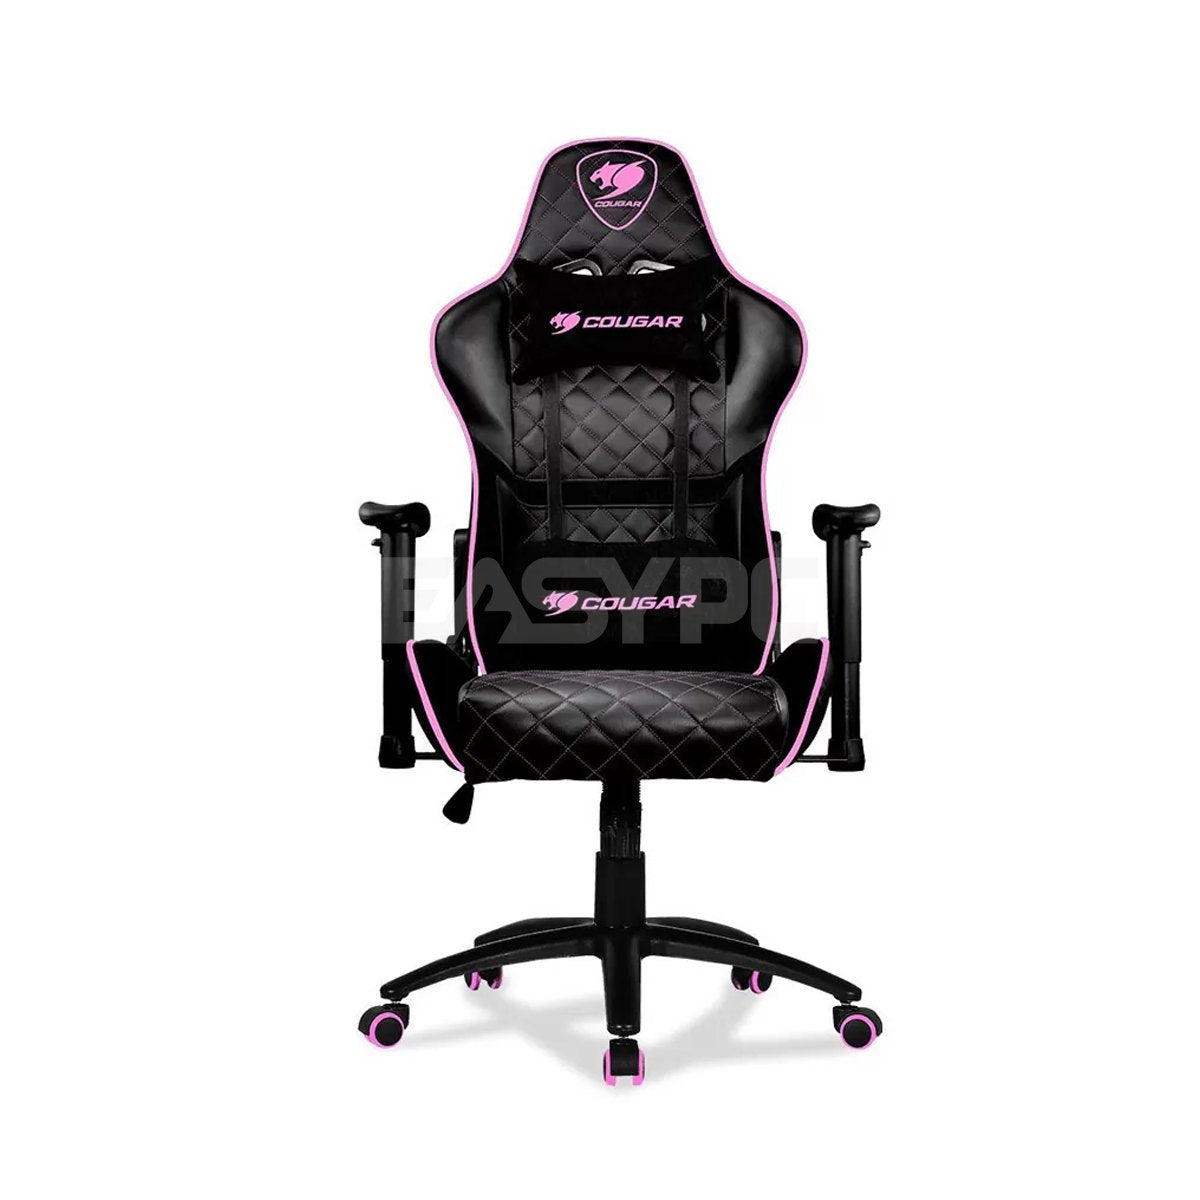 Cougar Armor One Gaming Chair Black pink-e